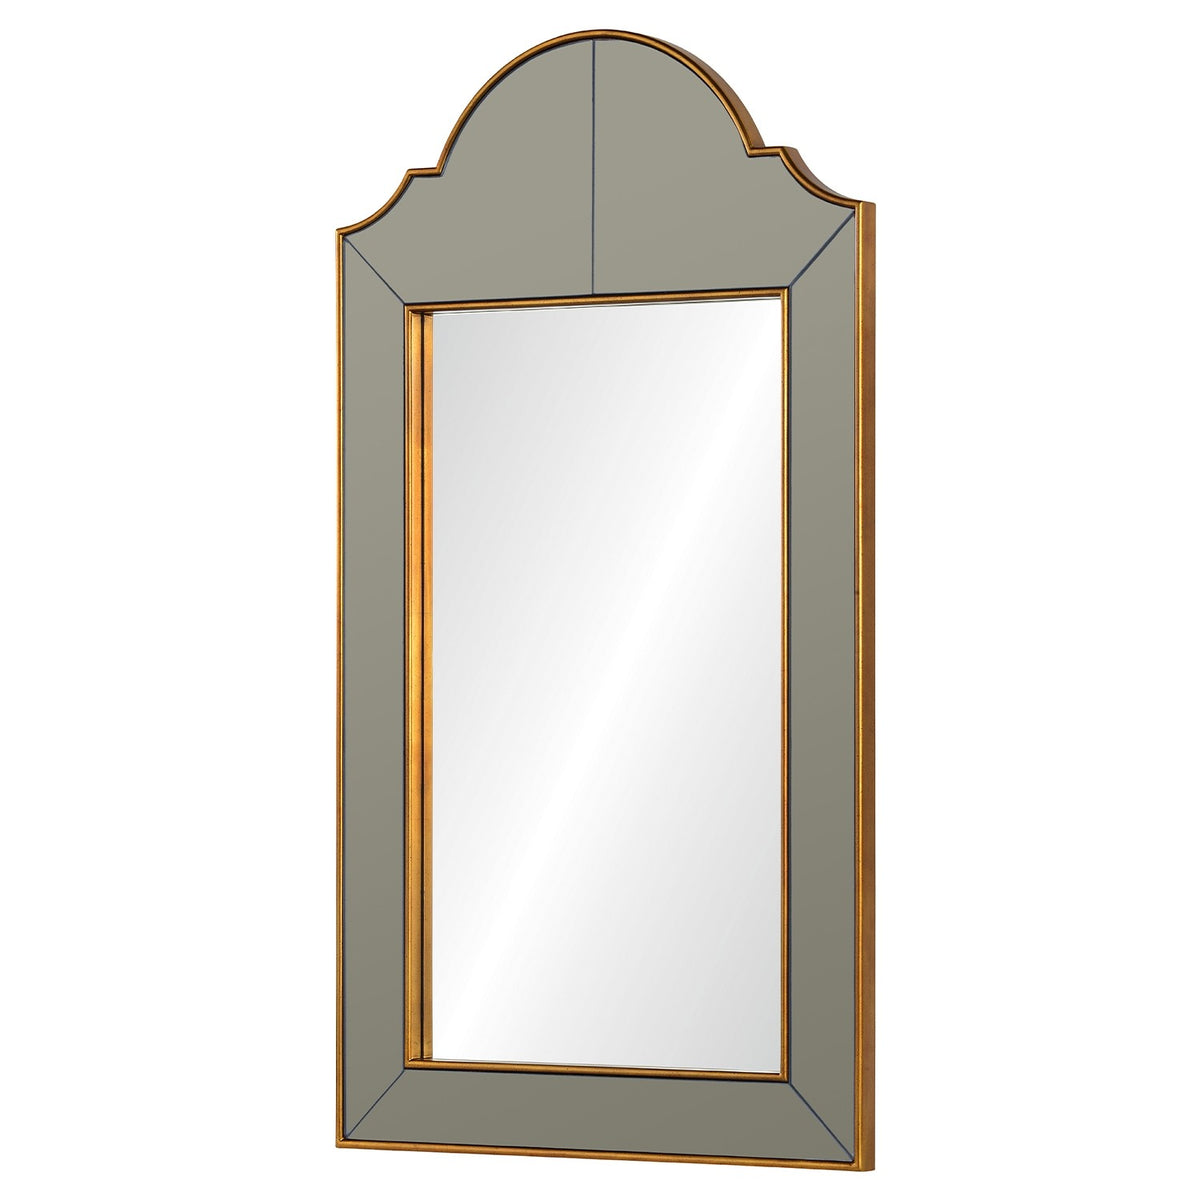 Antico Wall Mirror with Gold Trim